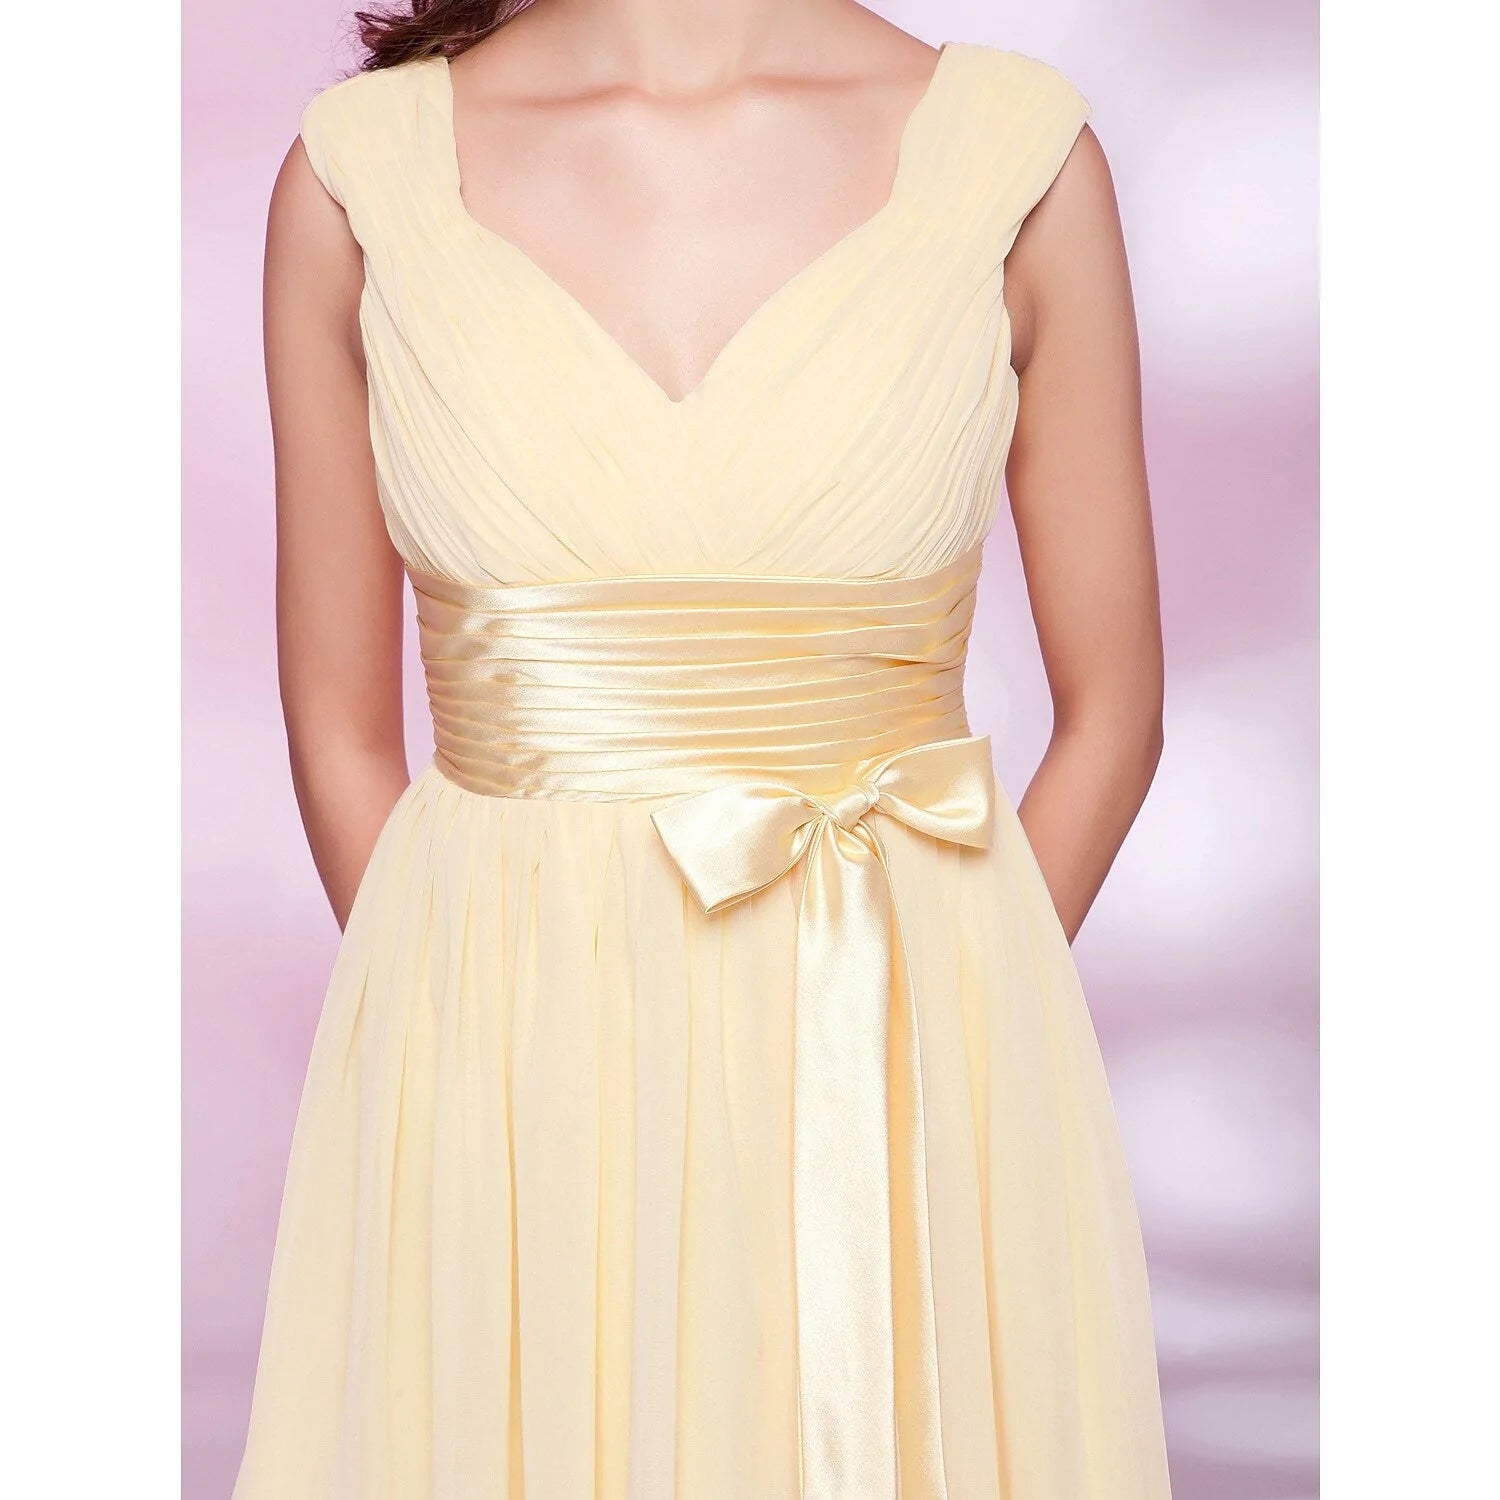 Ball Gown / A-Line Bridesmaid Dress V Neck Sleeveless Knee Length Chiffon with Sash / Ribbon / Bow(s) / Ruched - RongMoon